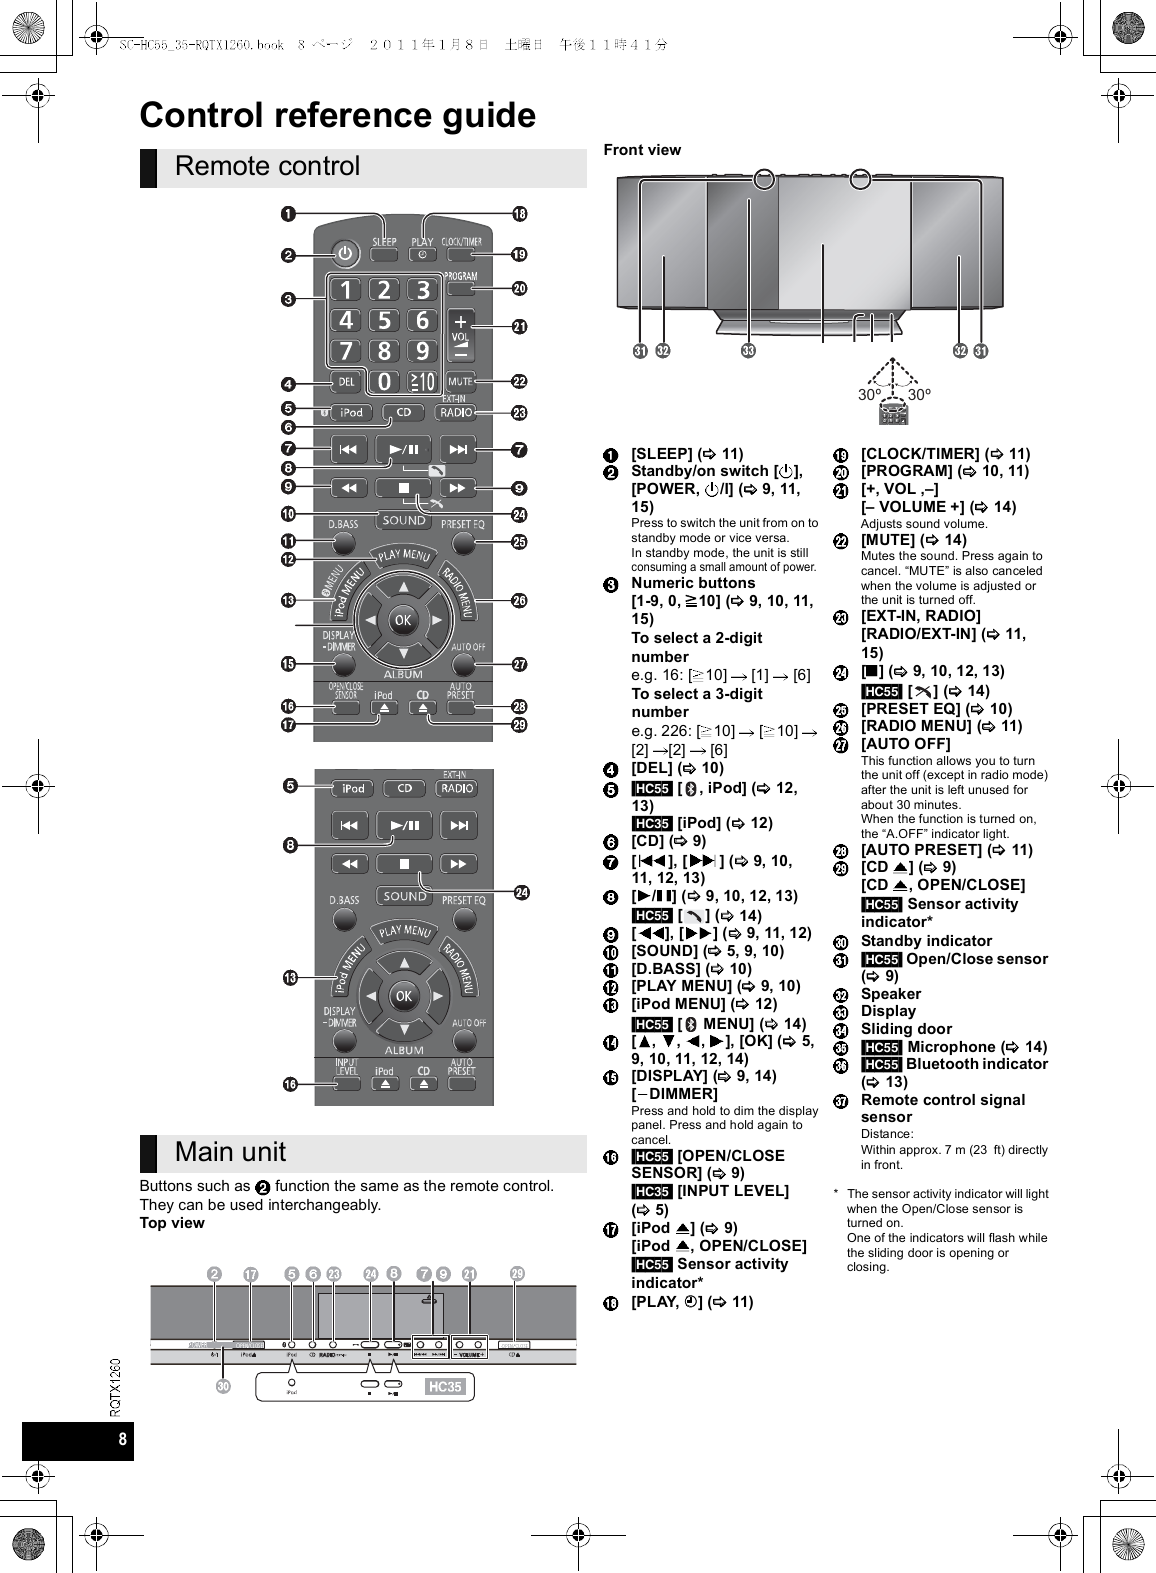 8Control reference guideButtons such as  function the same as the remote control.They can be used interchangeably.Top viewFront viewRemote controlMain unit[SLEEP] ( 11)Standby/on switch [ ],[POWER, /I] ( 9, 11,15)Press to switch the unit from on tostandby mode or vice versa.In standby mode, the unit is stillconsuming a small amount of power.Numeric buttons[1-9, 0, 10] ( 9, 10, 11,15)To select a 2-digitnumbere.g. 16: [ 10]  [1]  [6]To select a 3-digitnumbere.g. 226: [ 10]  [ 10][2] [2]  [6][DEL] ( 10)[HC55] [ , iPod] ( 12,13)[HC35] [iPod] ( 12)[CD] ( 9)[], [ ] ( 9, 10,11, 12, 13)[ / ] ( 9, 10, 12, 13)[HC55] [ ] ( 14)[], [ ] ( 9, 11, 12)[SOUND] ( 5, 9, 10)[D.BASS] ( 10)[PLAY MENU] ( 9, 10)[iPod MENU] ( 12)[HC55] [  MENU] ( 14)[ , , , ], [OK] ( 5,9, 10, 11, 12, 14)[DISPLAY] ( 9, 14)[DIMMER]Press and hold to dim the displaypanel. Press and hold again tocancel.[HC55] [OPEN/CLOSESENSOR] ( 9)[HC35] [INPUT LEVEL](5)[iPod ] ( 9)[iPod , OPEN/CLOSE][HC55] Sensor activityindicator*[P L AY, ] ( 11)[CLOCK/TIMER] ( 11)[PROGRAM] ( 10, 11)[+, VOL ,] VOLUME +] ( 14)Adjusts sound volume.[MUTE] ( 14)Mutes the sound. Press again tocancel. MUTE is also canceledwhen the volume is adjusted orthe unit is turned off.[EXT-IN, RADIO][RADIO/EXT-IN] ( 11,15)[] ( 9, 10, 12, 13)[HC55] [ ] ( 14)[PRESET EQ] ( 10)[RADIO MENU] ( 11)[AUTO OFF]This function allows you to turnthe unit off (except in radio mode)after the unit is left unused forabout 30 minutes.When the function is turned on,the A.OFF indicator light.[AUTO PRESET] ( 11)[CD ] ( 9)[CD , OPEN/CLOSE][HC55] Sensor activityindicator*Standby indicator[HC55] Open/Close sensor( 9)SpeakerDisplaySliding door[HC55] Microphone ( 14)[HC55] Bluetooth indicator(13)Remote control signalsensorDistance:Within approx. 7 m (23 ft) directlyin front.* The sensor activity indicator will lightwhen the Open/Close sensor isturned on.One of the indicators will flash whilethe sliding door is opening orclosing. 